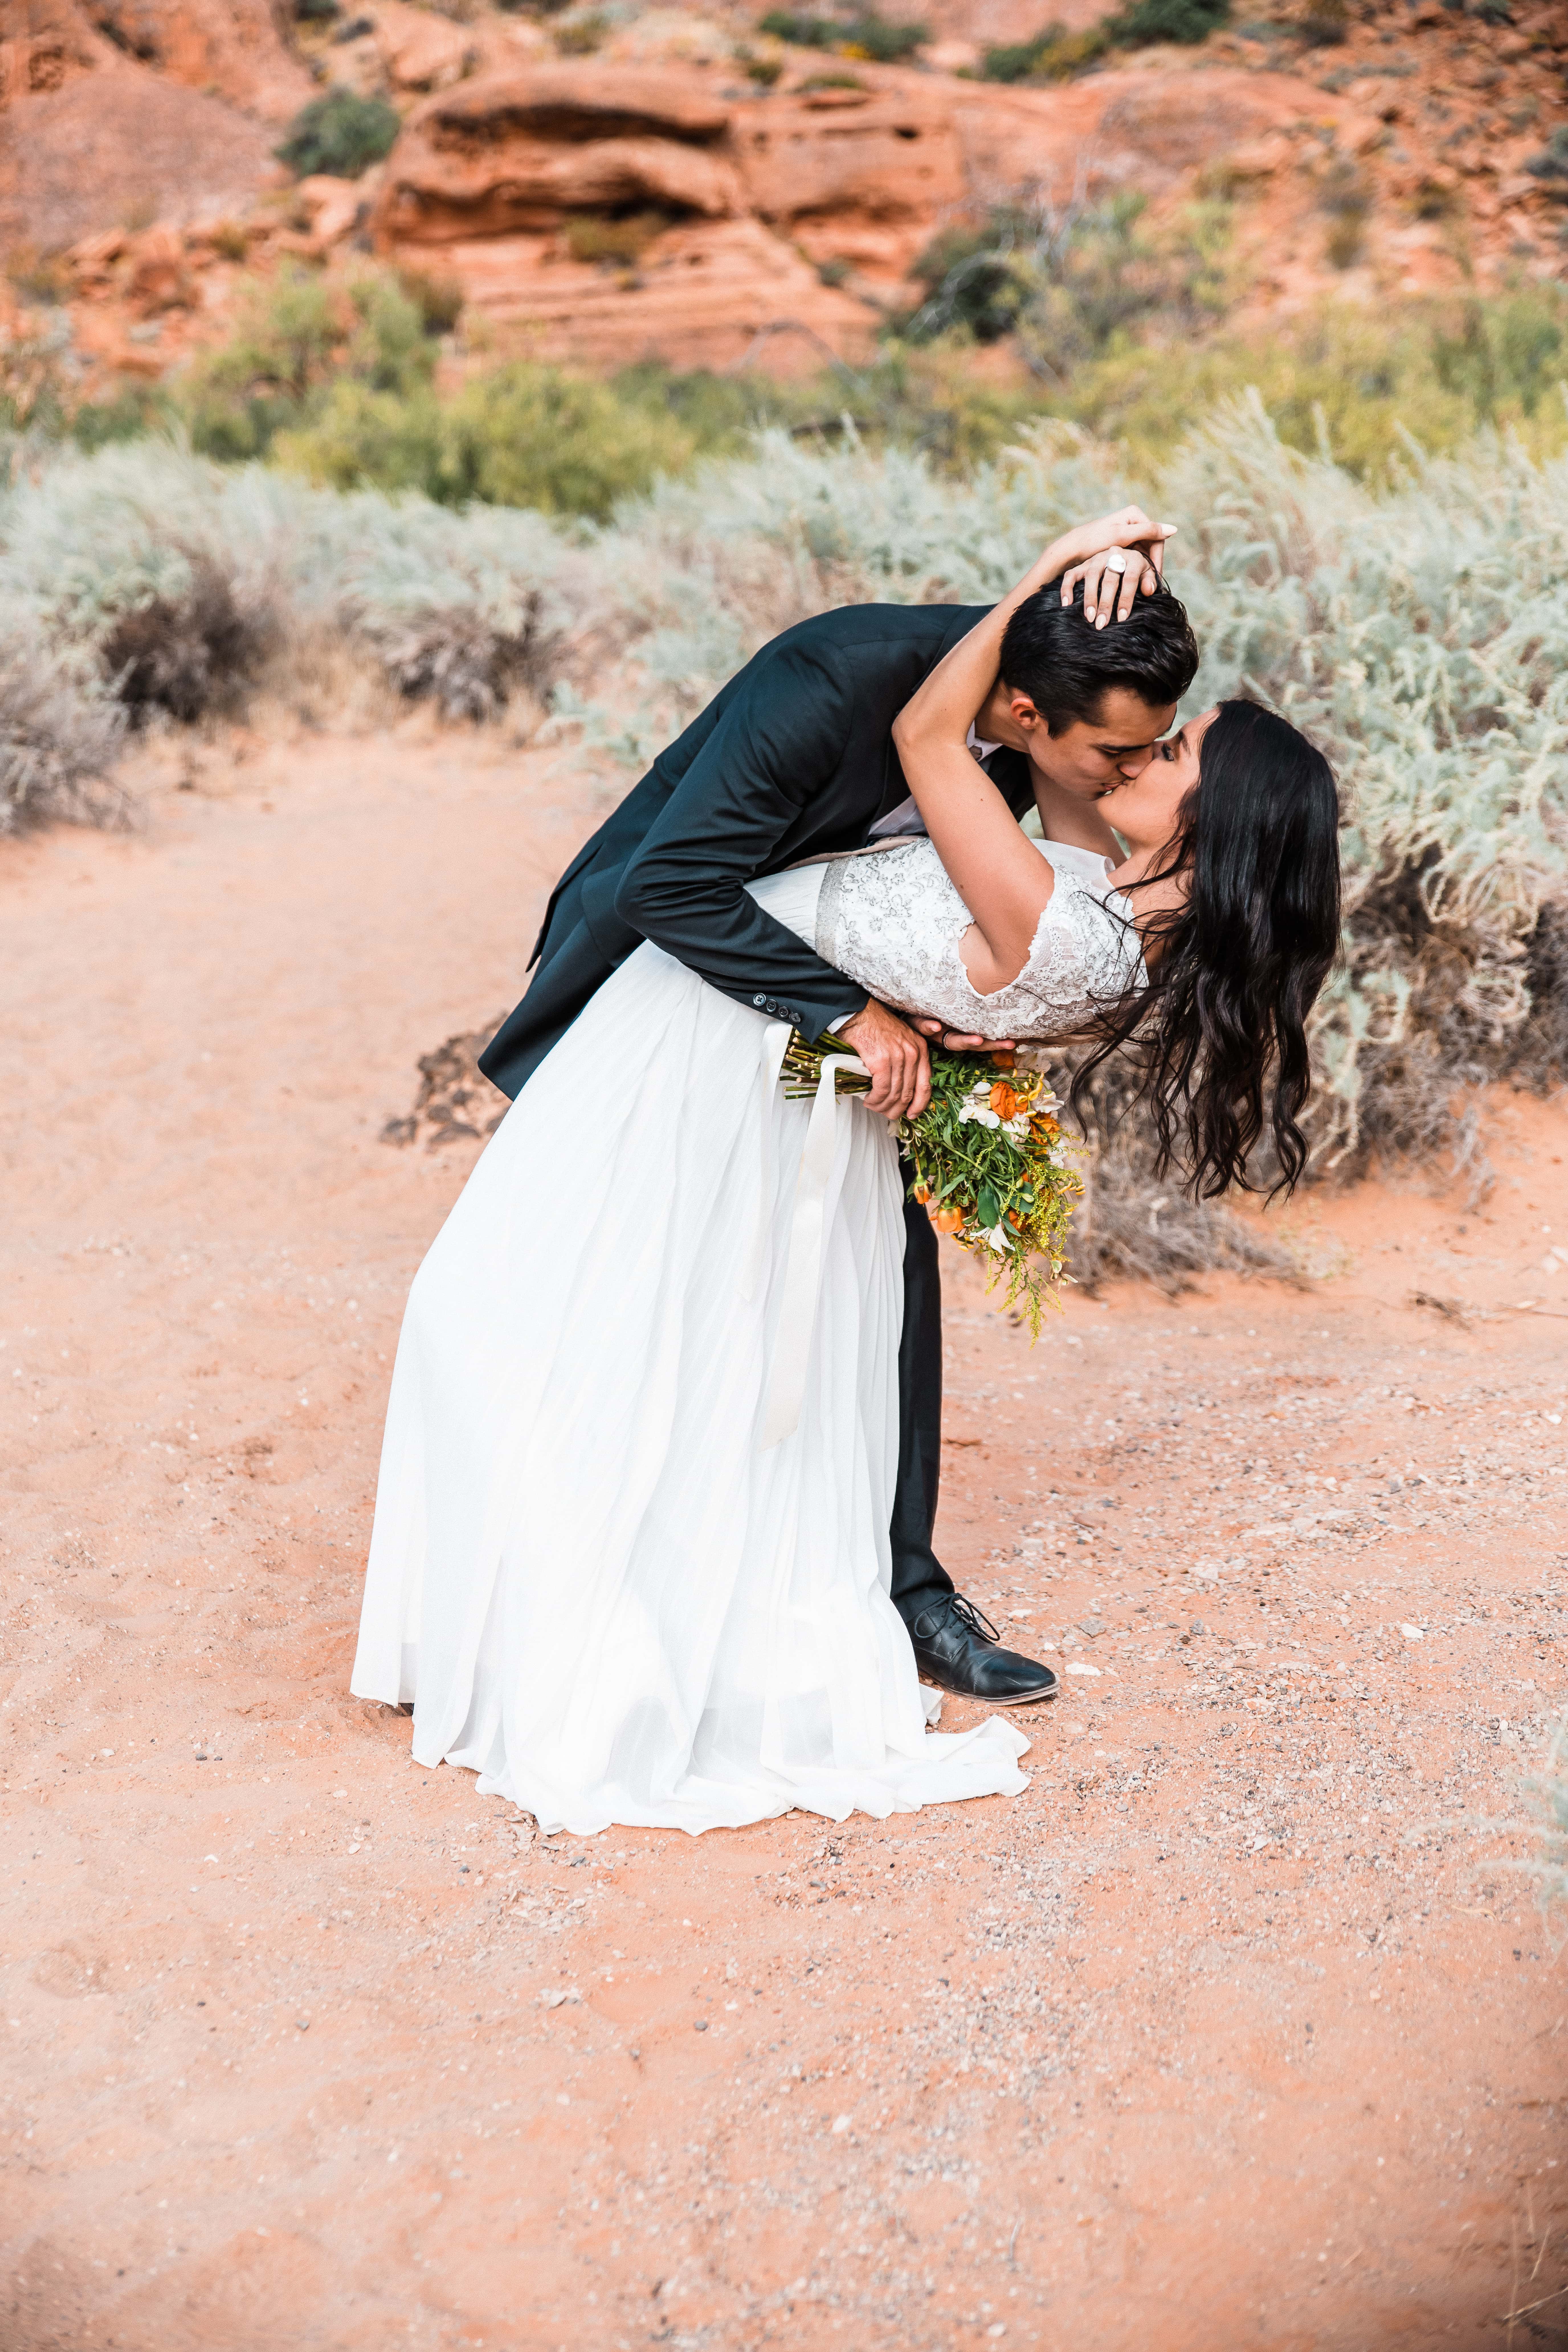 A first kiss after being married in southern Utah